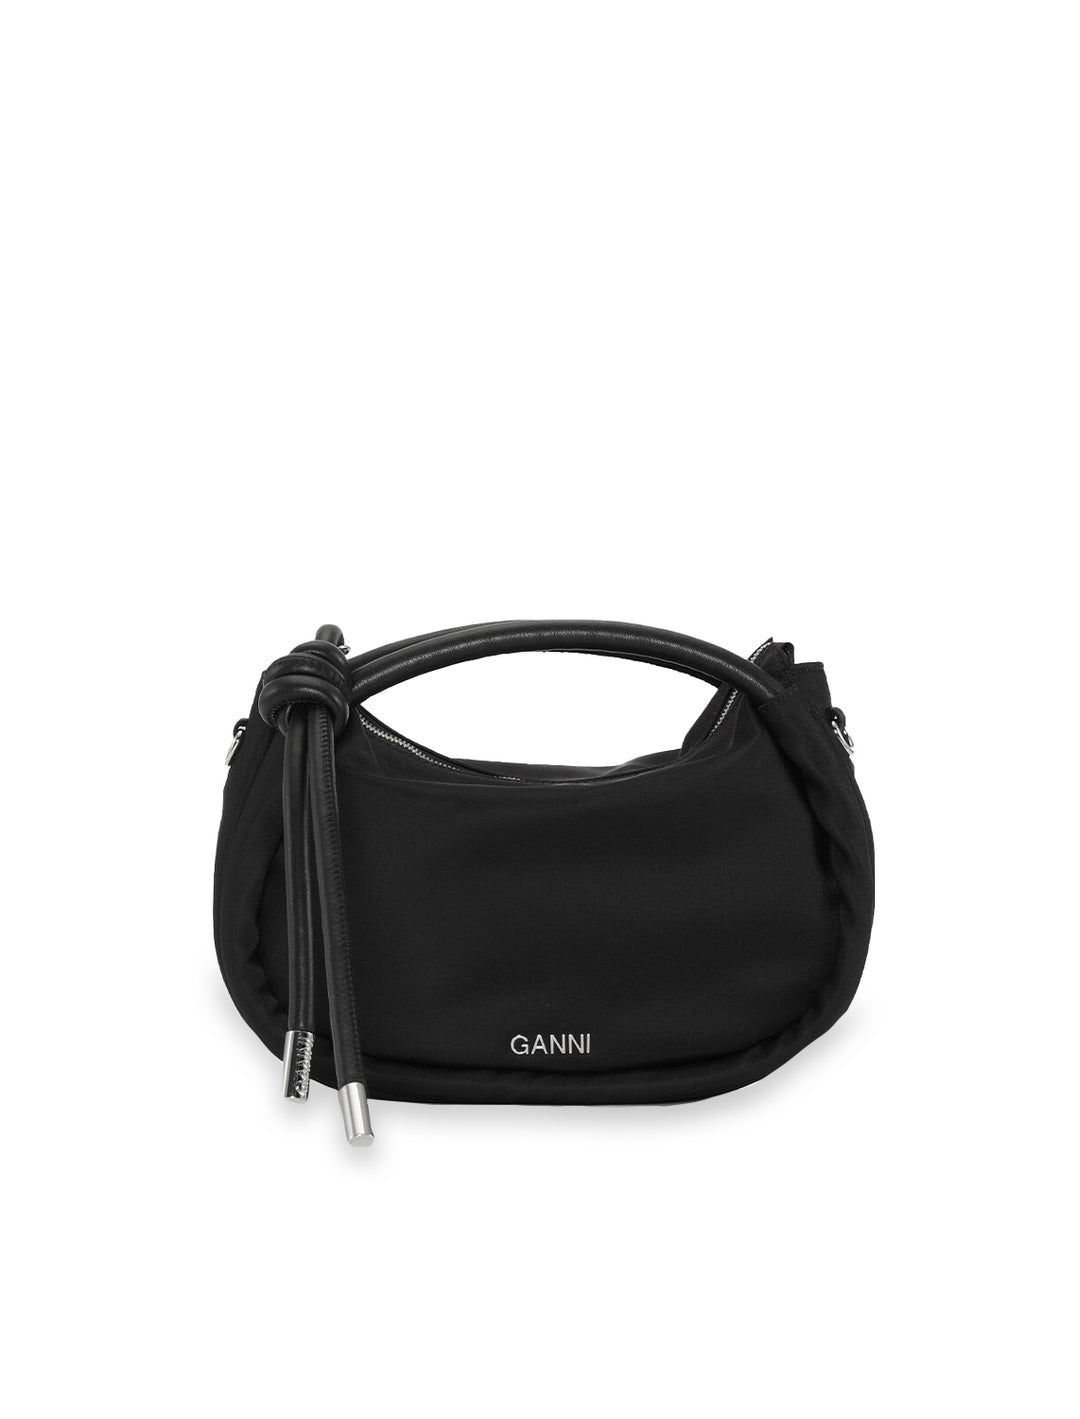 Front view of GANNI's knot mini bag in black.